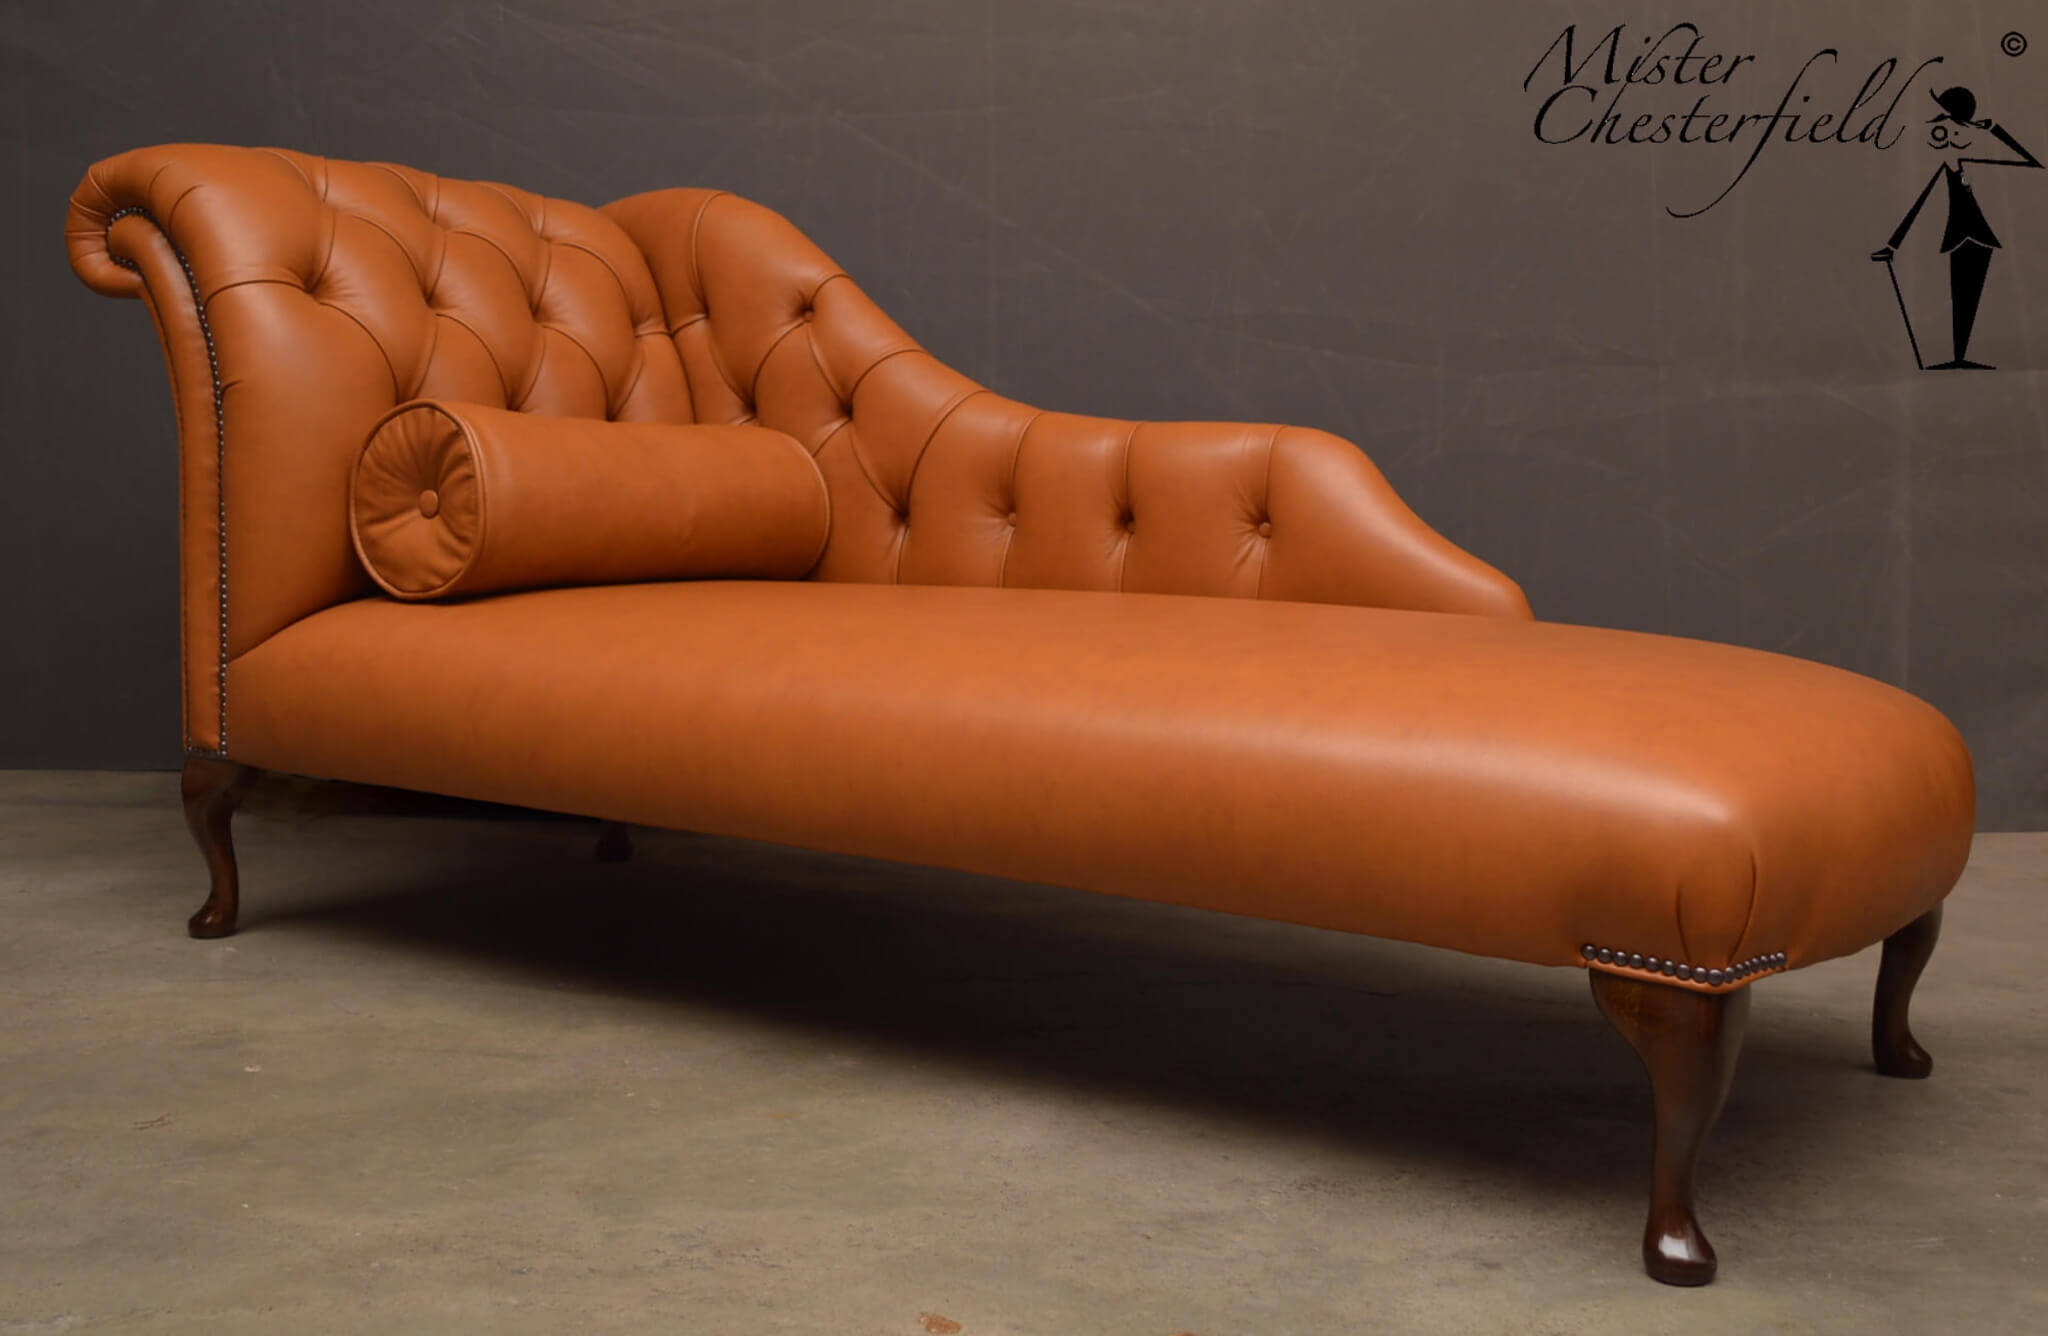 fotolibro-chesterfield-chaise-longue-mister